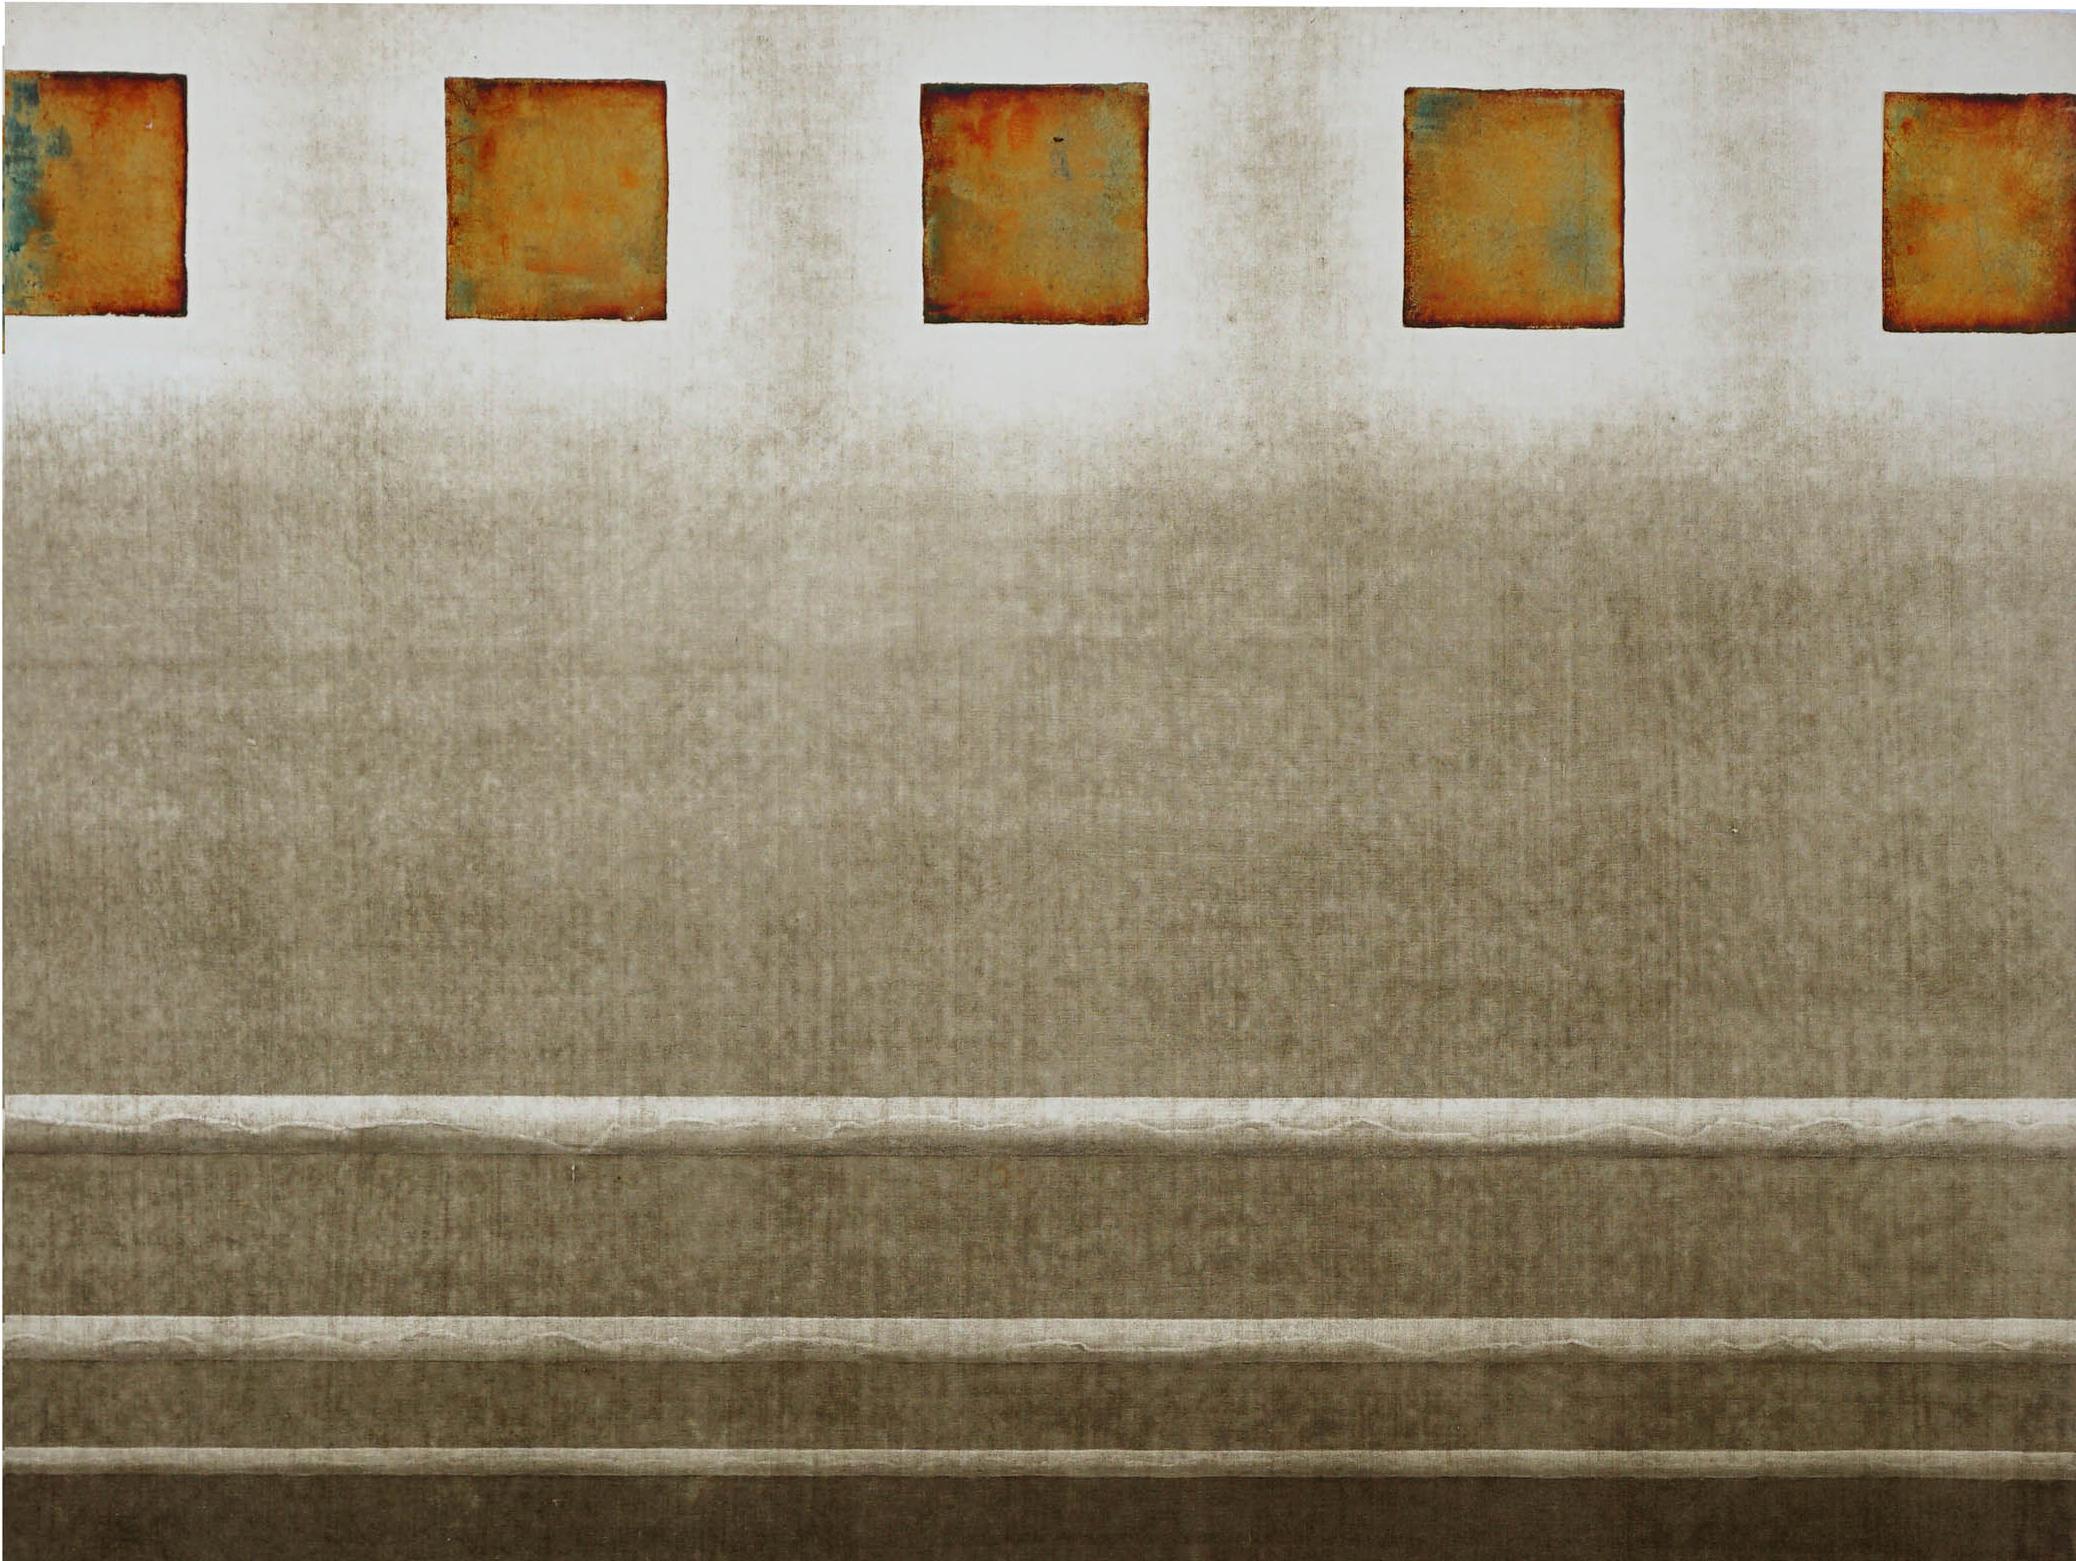 Bronze Block and Rods Collotype Diptych - Abstract Geometric Painting by Patricia A Pearce